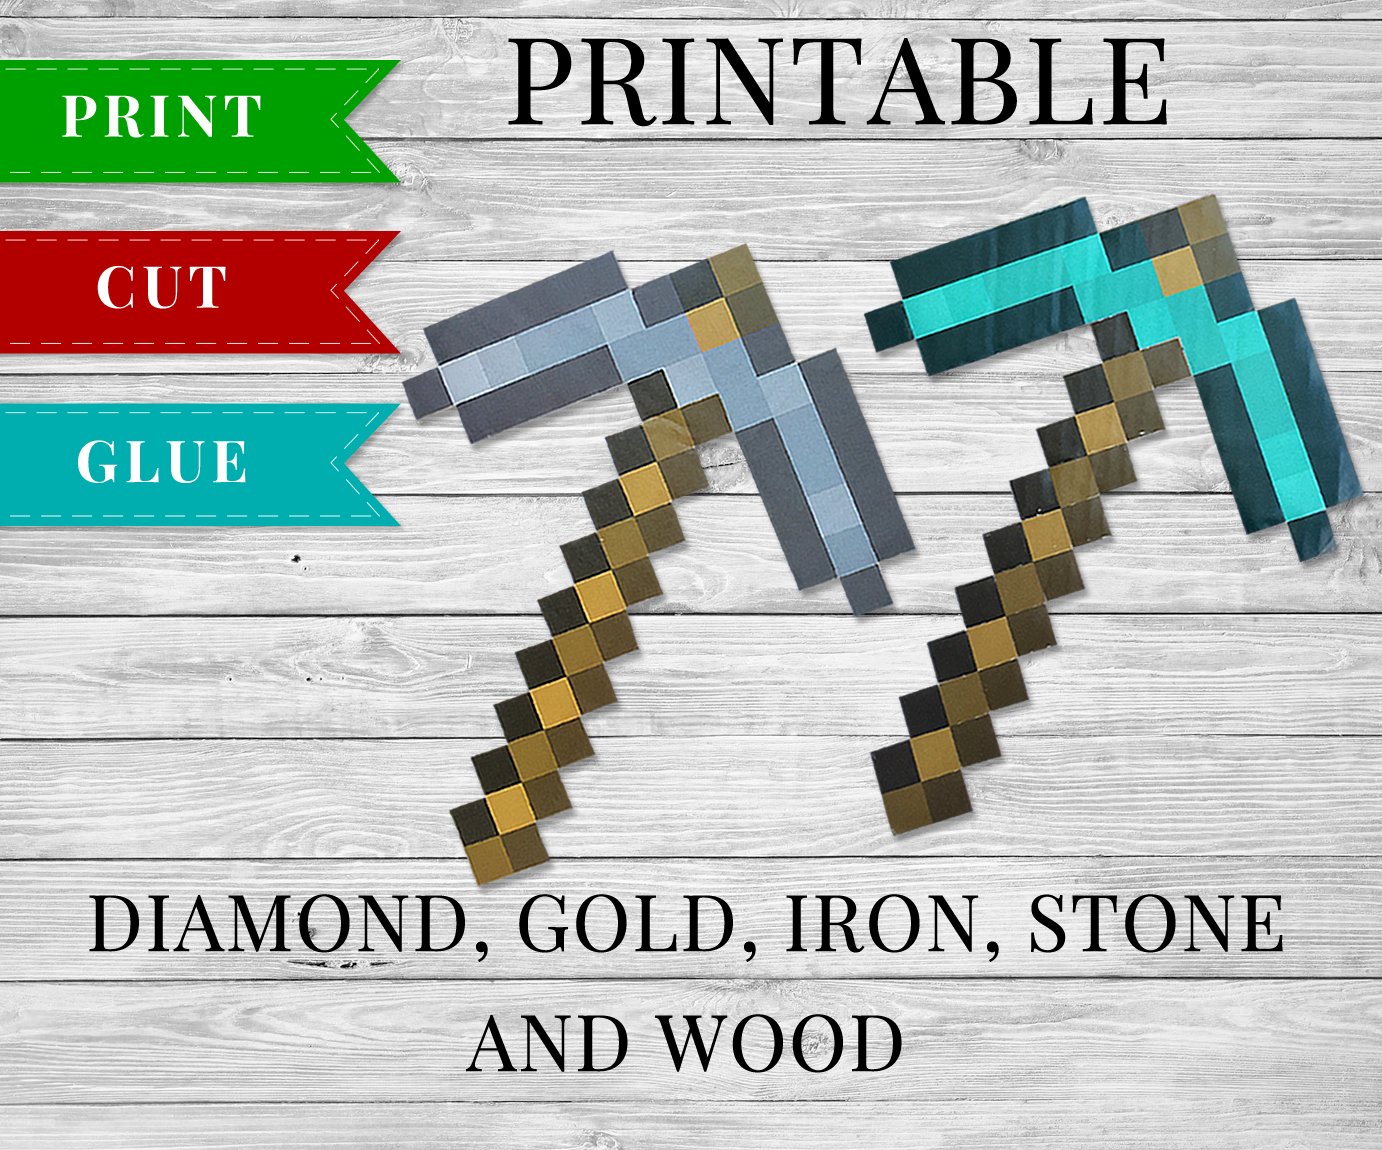 Minecraft Pickaxe And Sword Papercraft